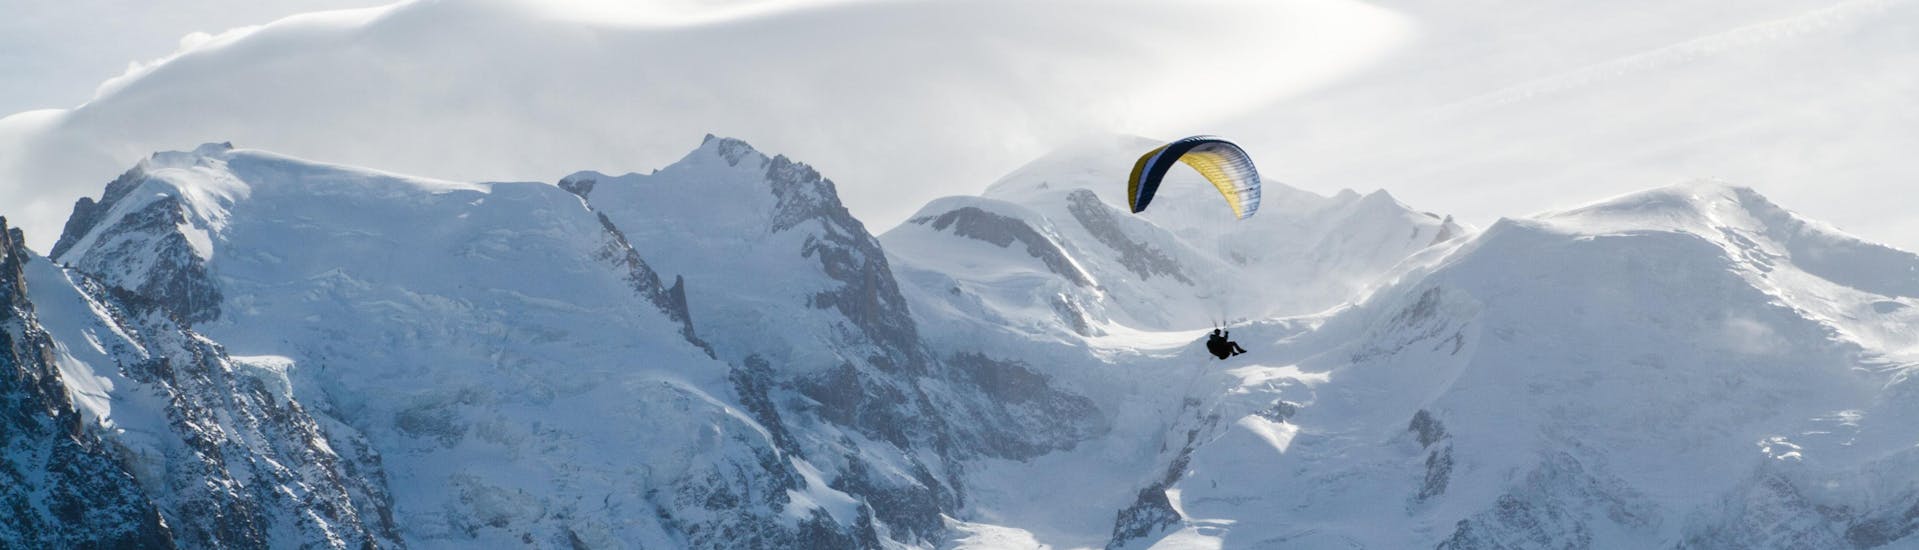 A person is doing a paragliding flight in the Chamonix valley with snowy mountains in the background.